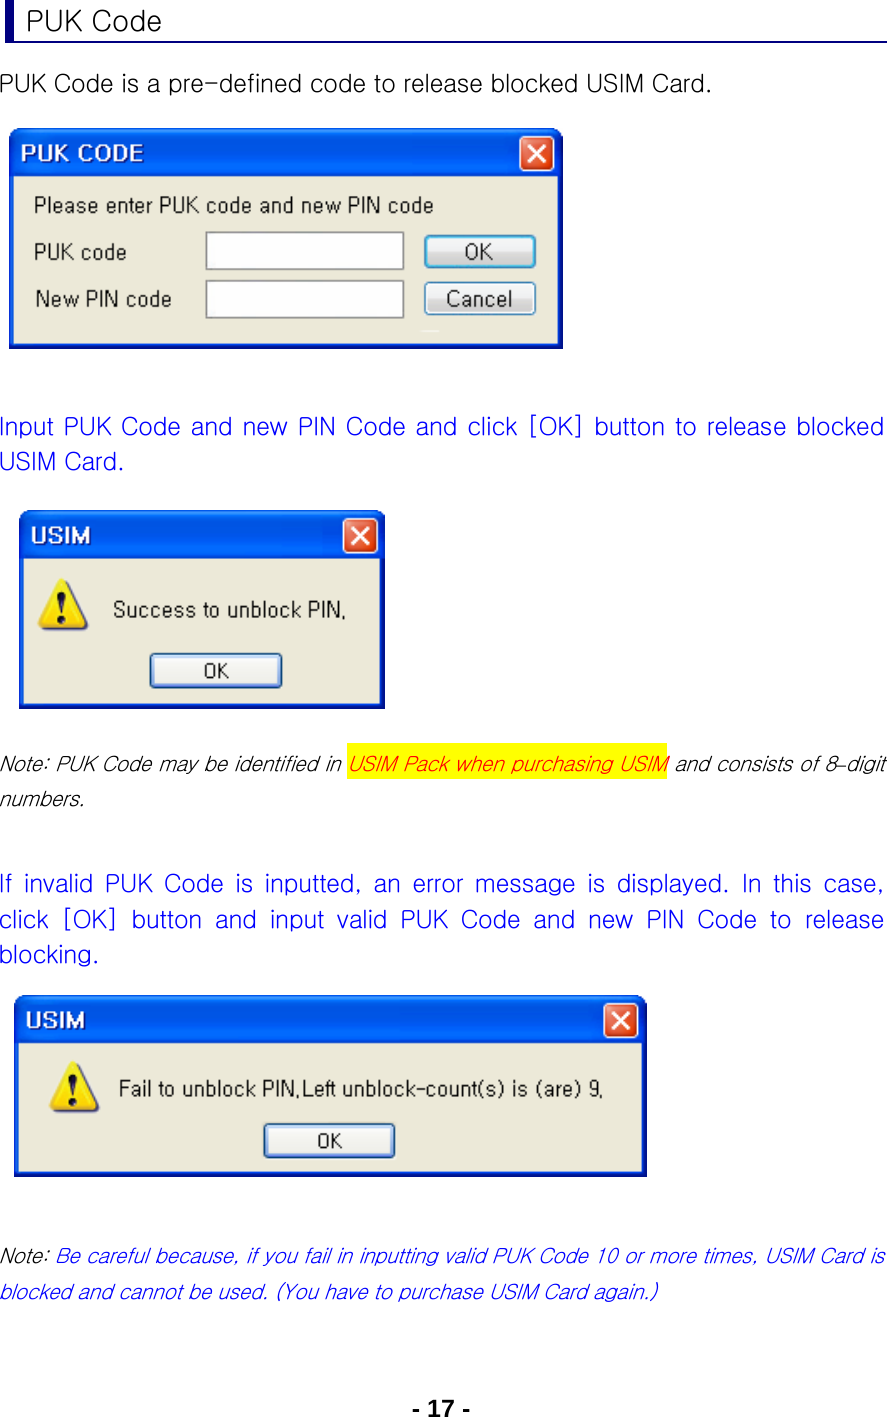 - 17 - PUK Code PUK Code is a pre-defined code to release blocked USIM Card.          Input PUK Code and new PIN Code and click [OK] button to release blocked USIM Card.           Note: PUK Code may be identified in USIM Pack when purchasing USIM and consists of 8–digit numbers.  If  invalid  PUK  Code  is  inputted,  an  error  message  is  displayed. In this case, click  [OK]  button  and  input  valid  PUK  Code  and  new  PIN  Code  to  release blocking.       Note: Be careful because, if you fail in inputting valid PUK Code 10 or more times, USIM Card is blocked and cannot be used. (You have to purchase USIM Card again.)  